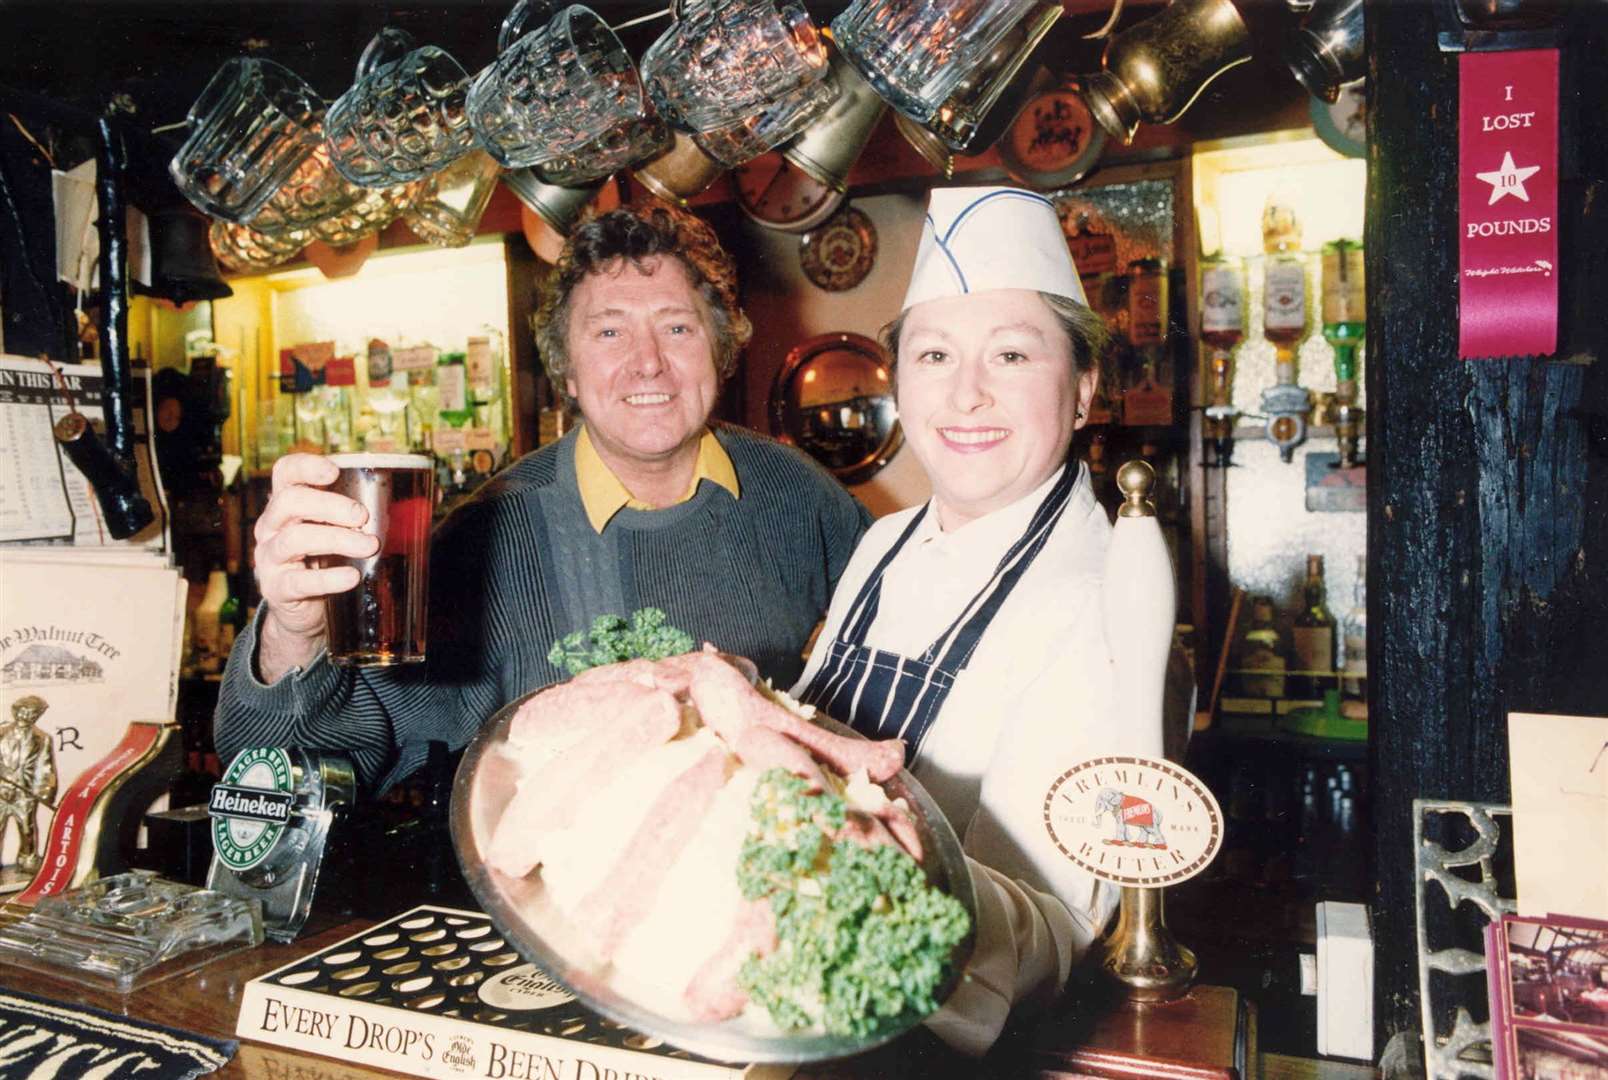 Ron and Linda Russell behind the bar at the Walnut Tree public house in Yalding in 1992. The historic pub, built in 1492, has now reopened in line with the latest government guidelines